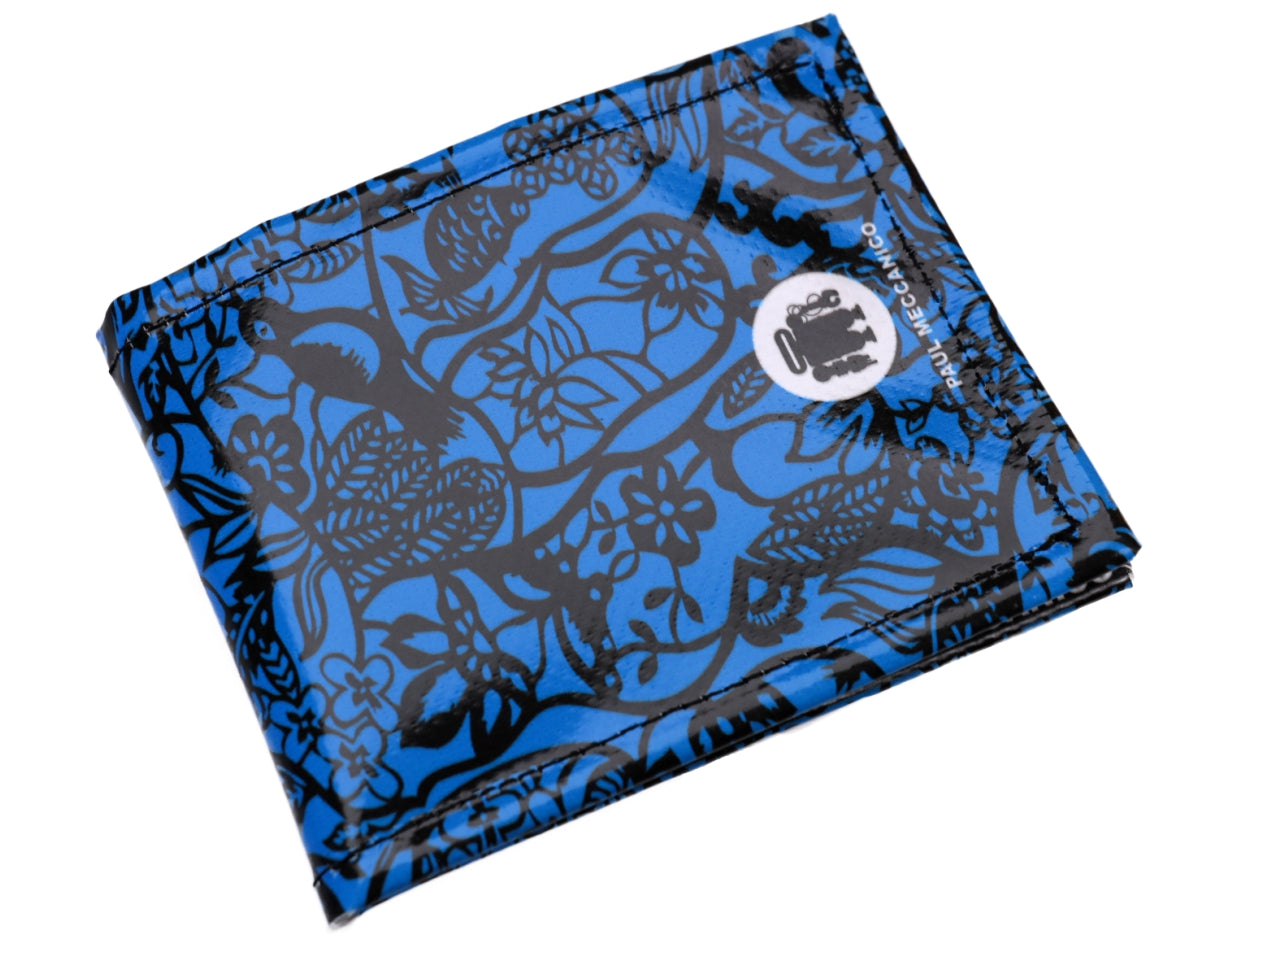 MEN'S WALLET IN ROYAL "FOREST". MODEL CRIK MADE OF LORRY TARPAULIN. - Limited Edition Paul Meccanico